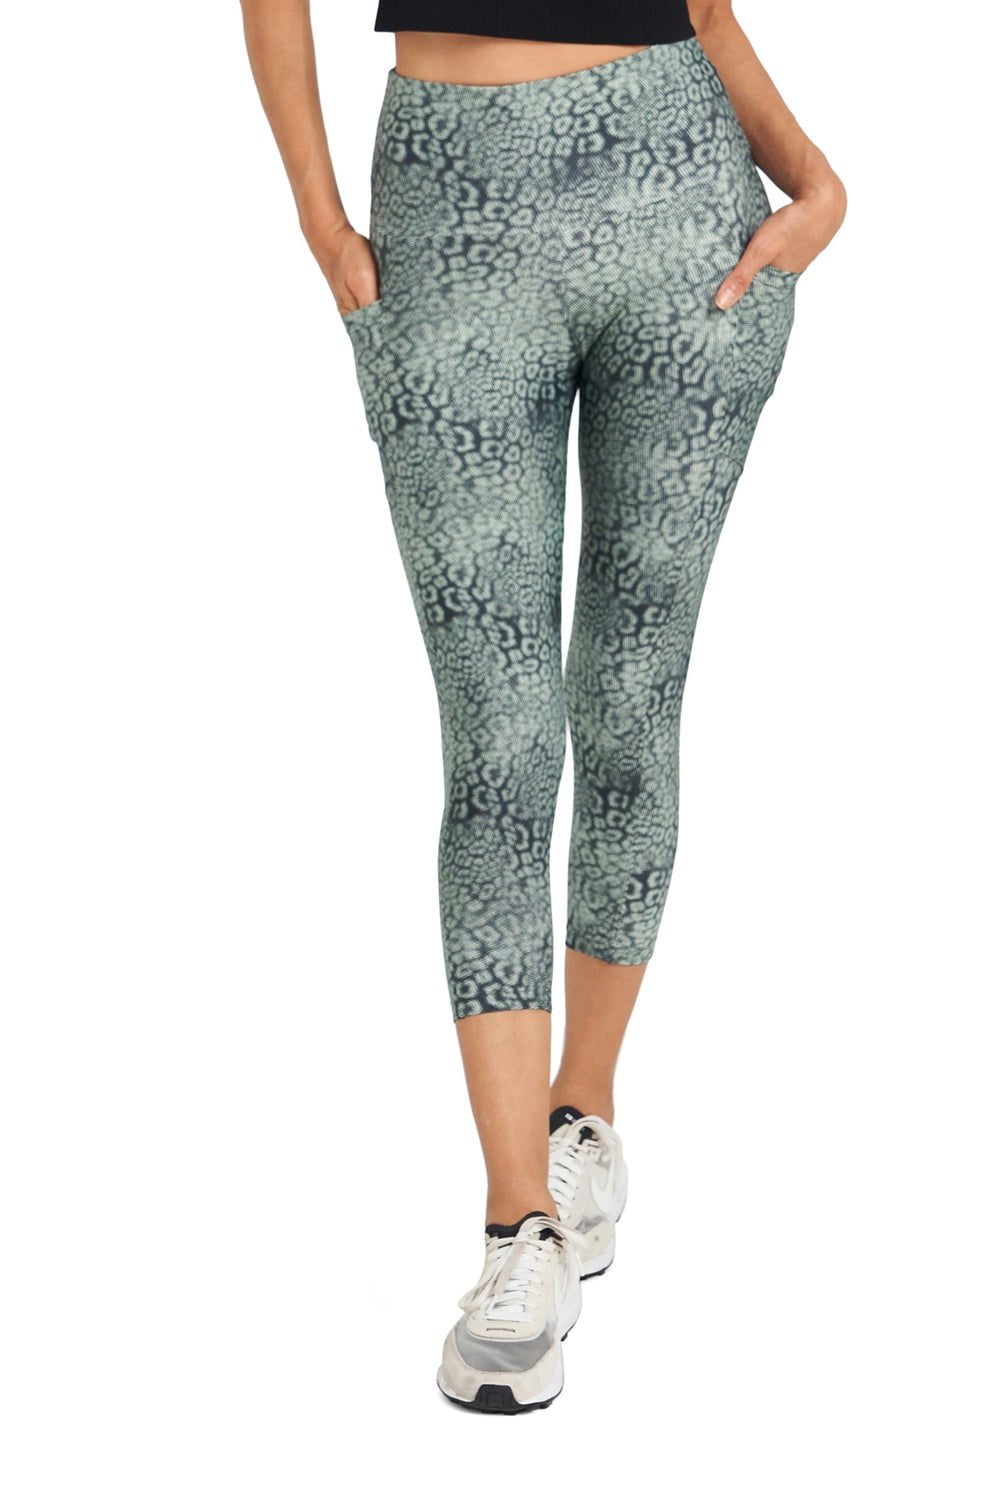 Buy Mid-Calf Length Training Tights Online at Best Prices in India -  JioMart.